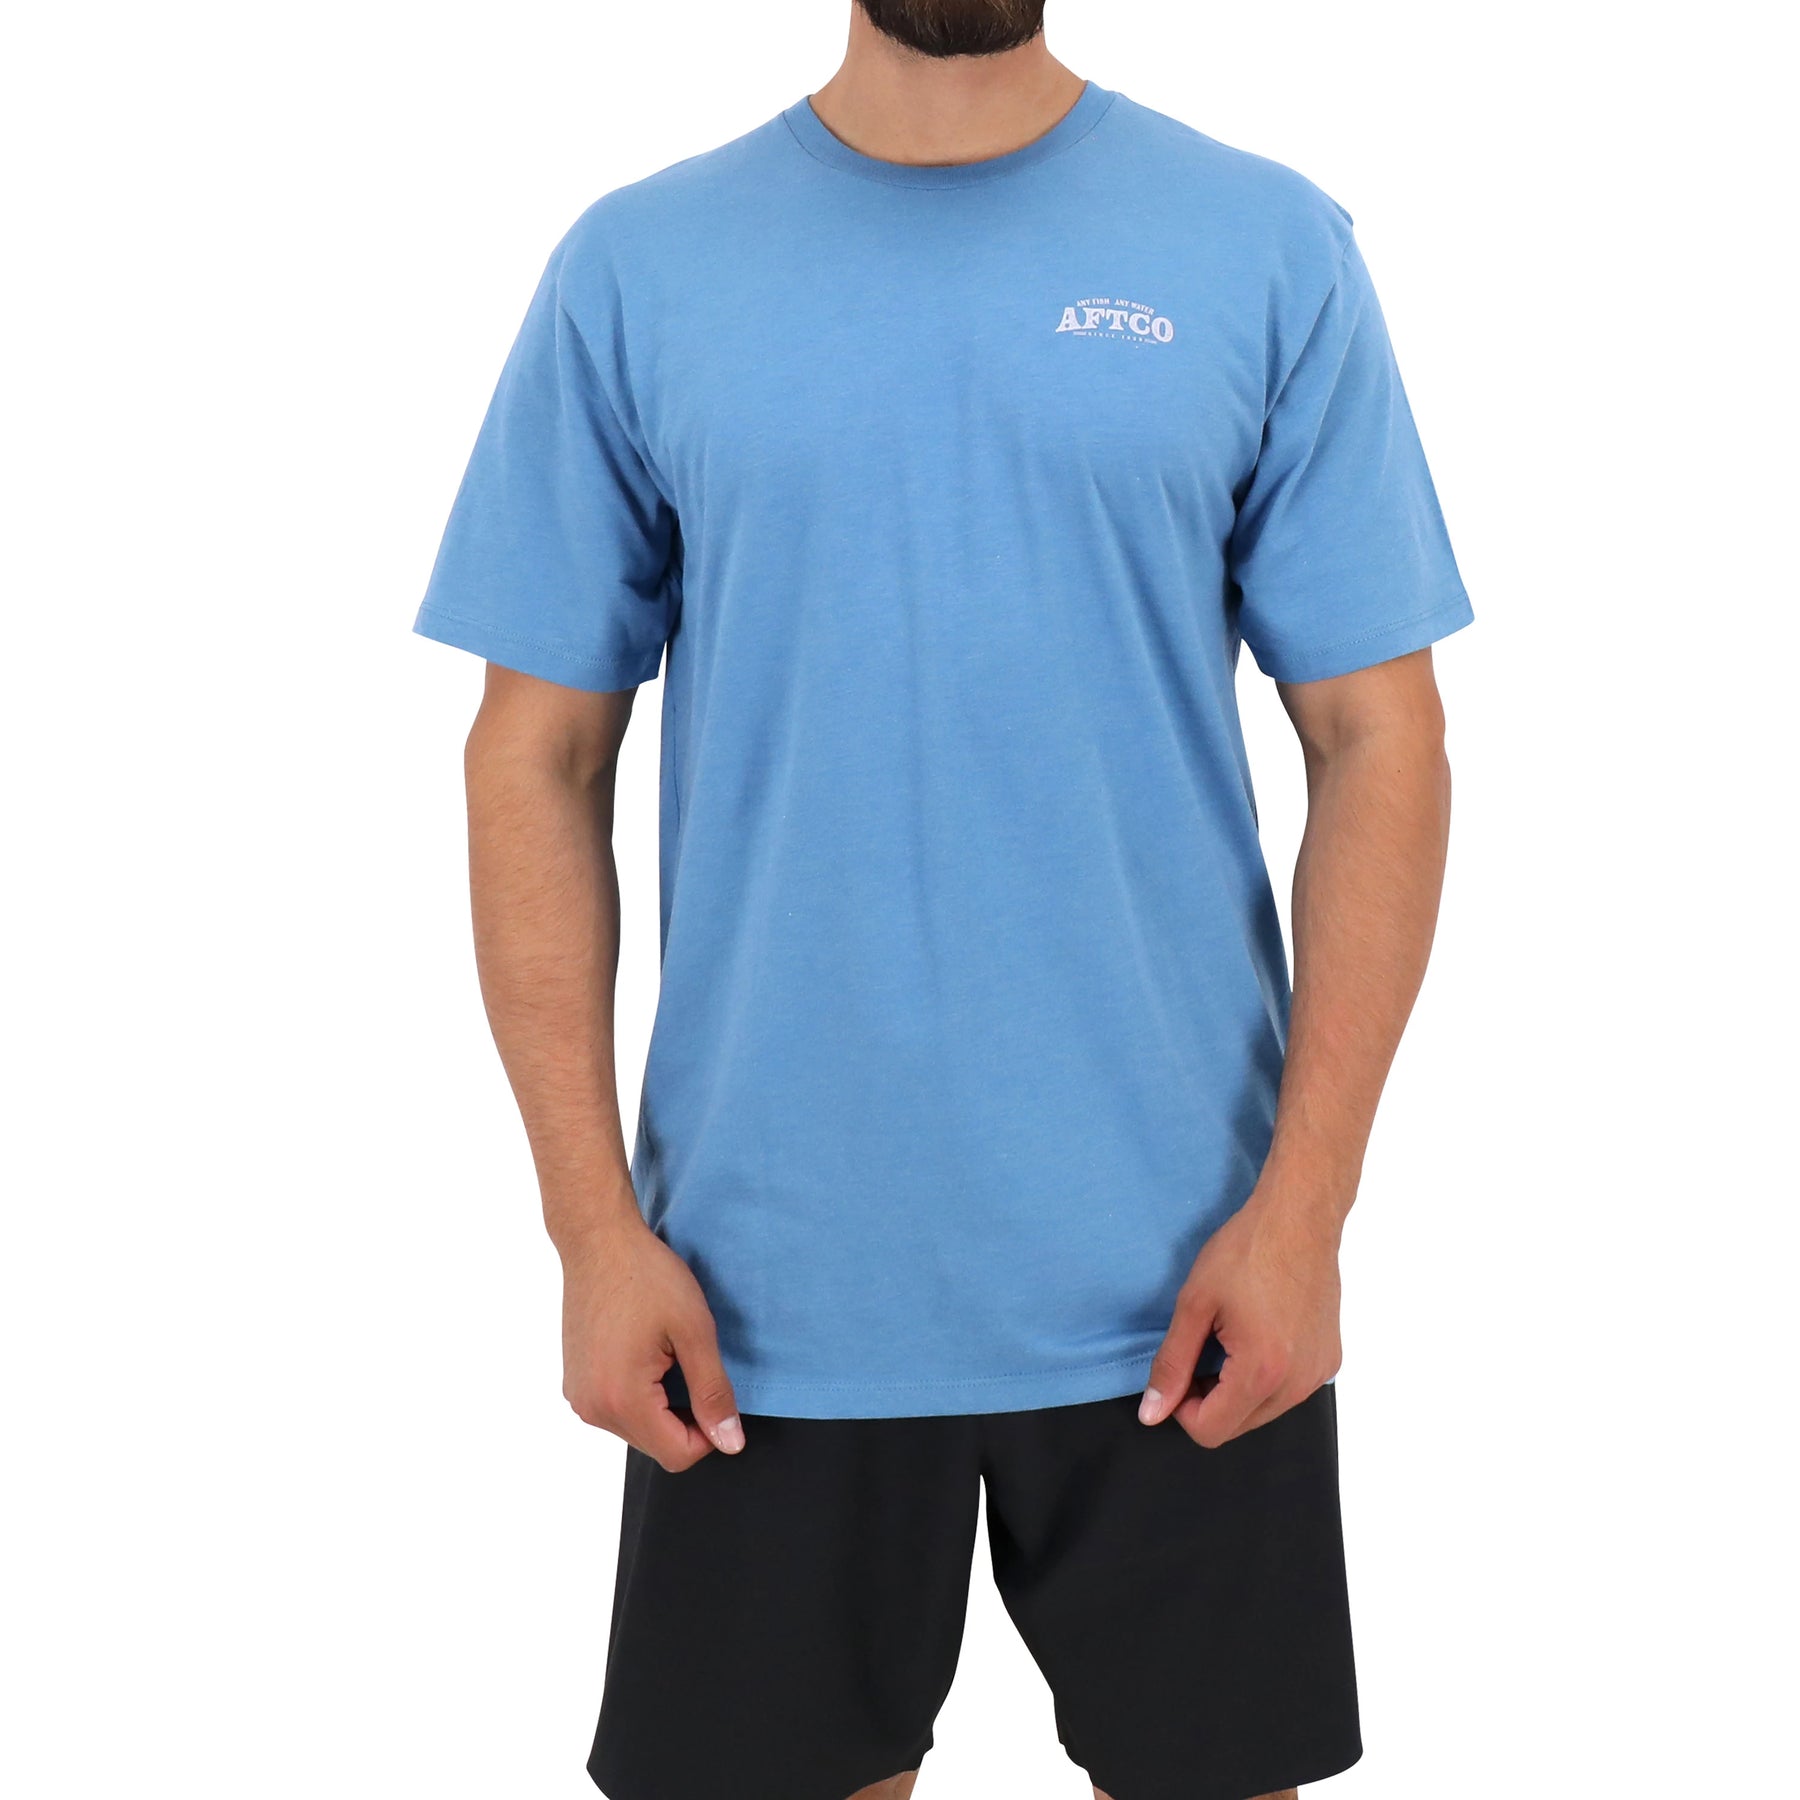 Aftco Weigh In Tuna SS T-Shirt - Azure Heather